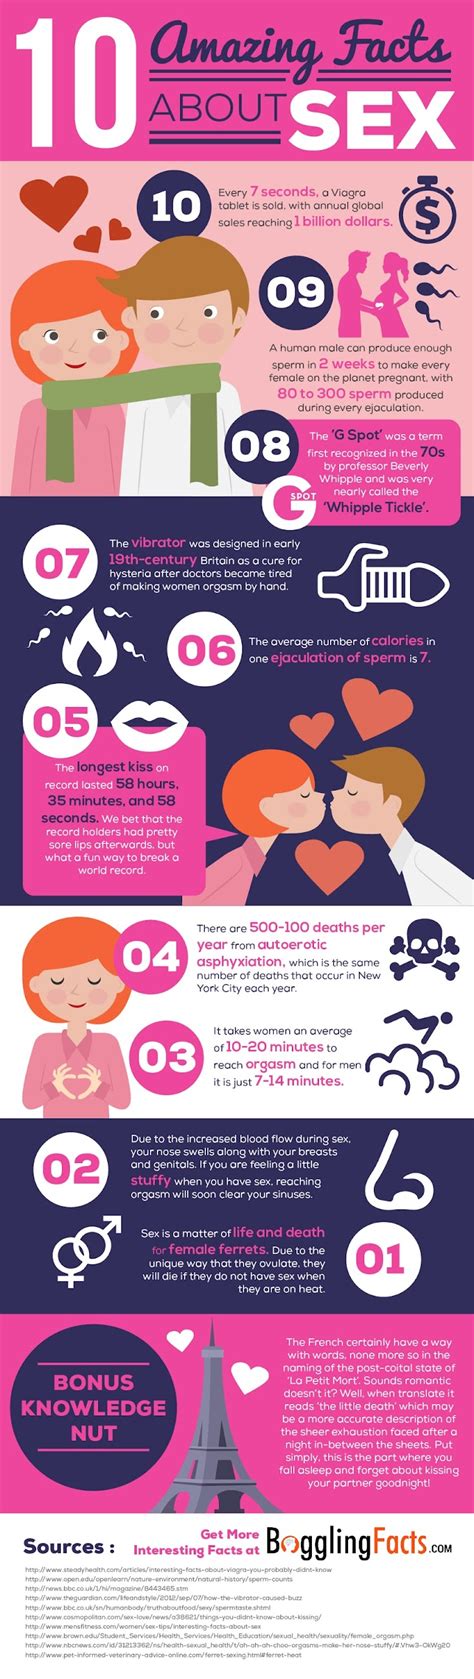 10 Amazing Facts About Sex